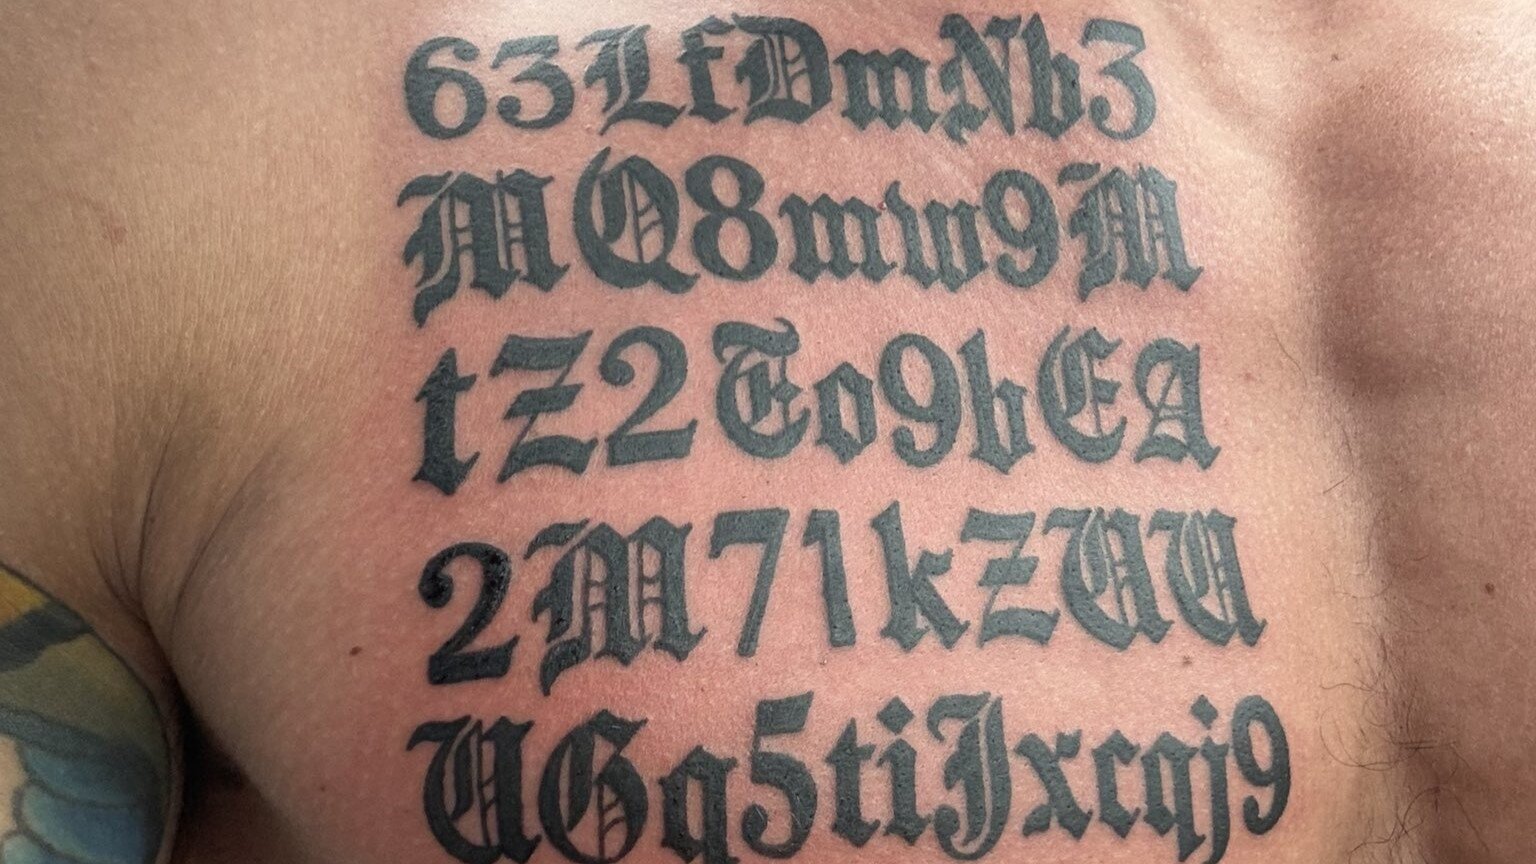 Man Gets Meme Coin Address Tattooed—But There's a Typo